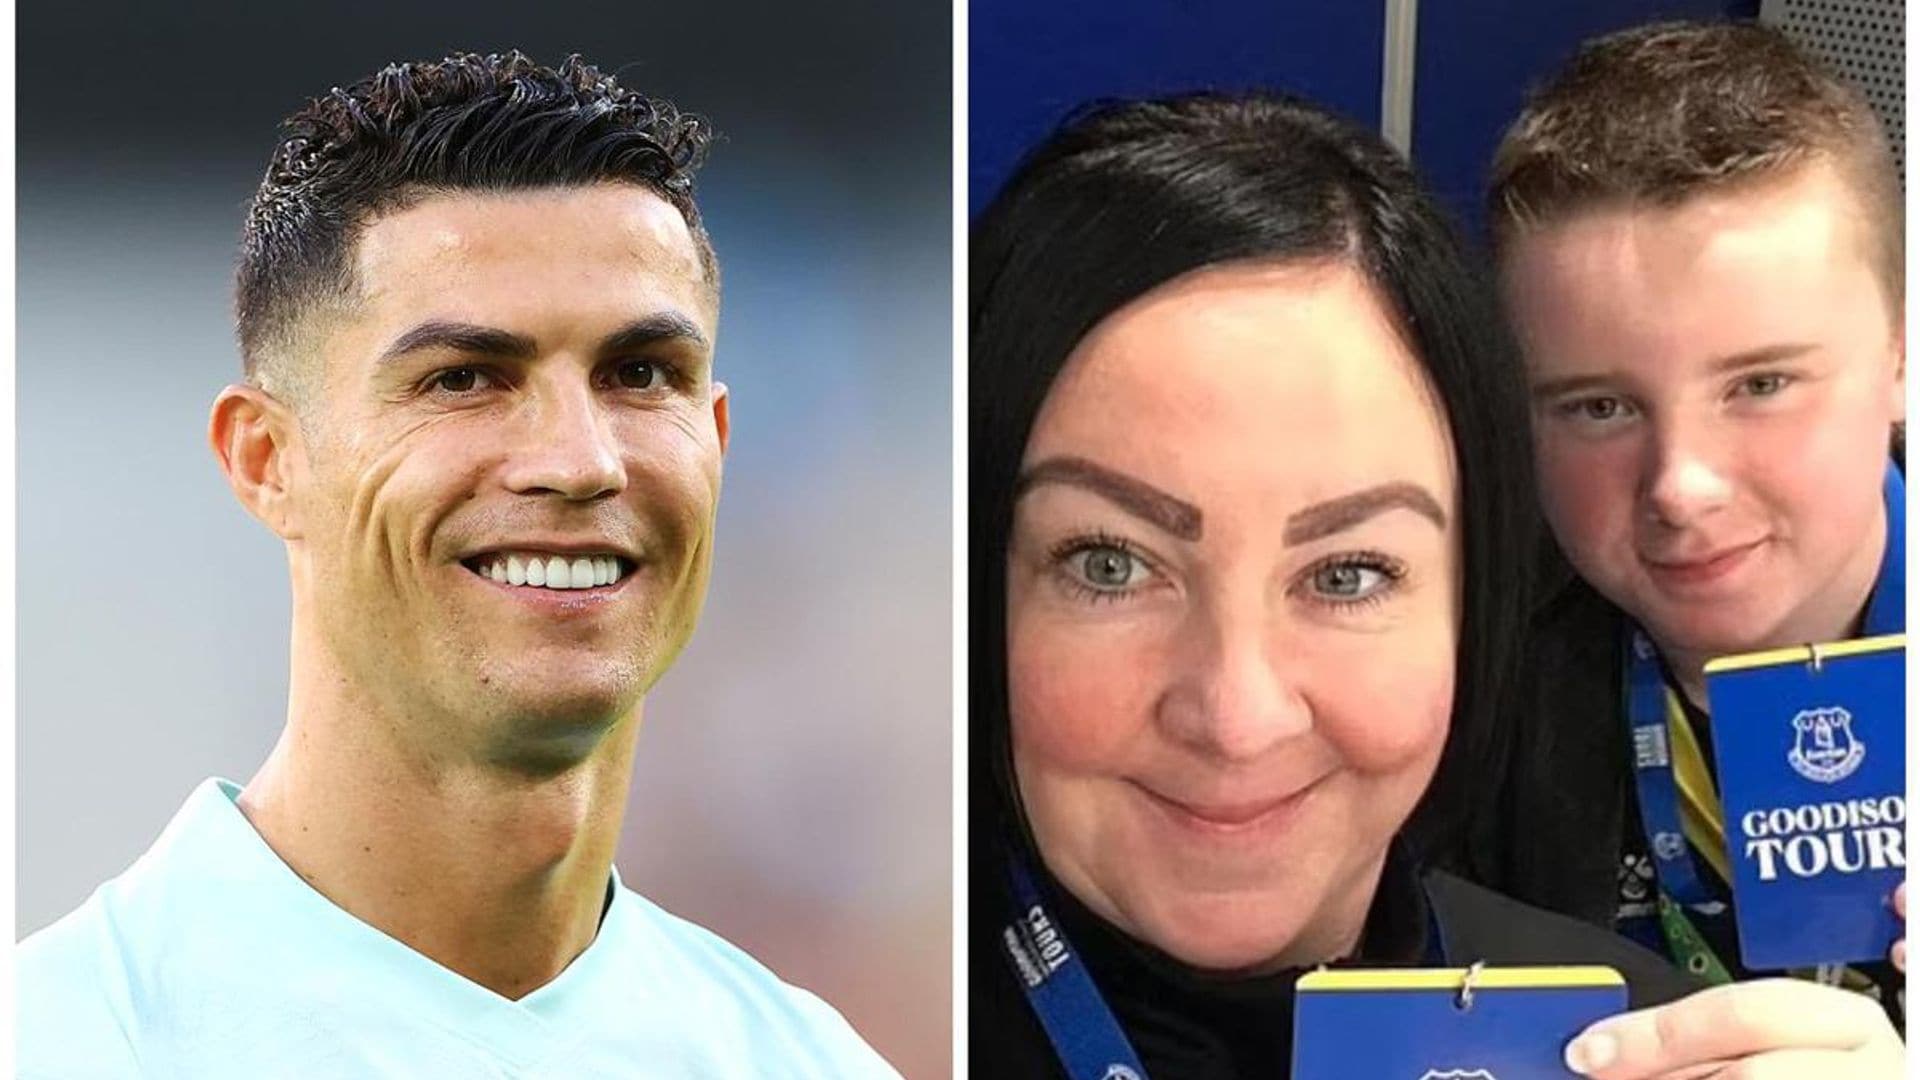 Cristiano Ronaldo apologizes to the autistic 14-year-old fan he slapped; the kid’s mom reacts